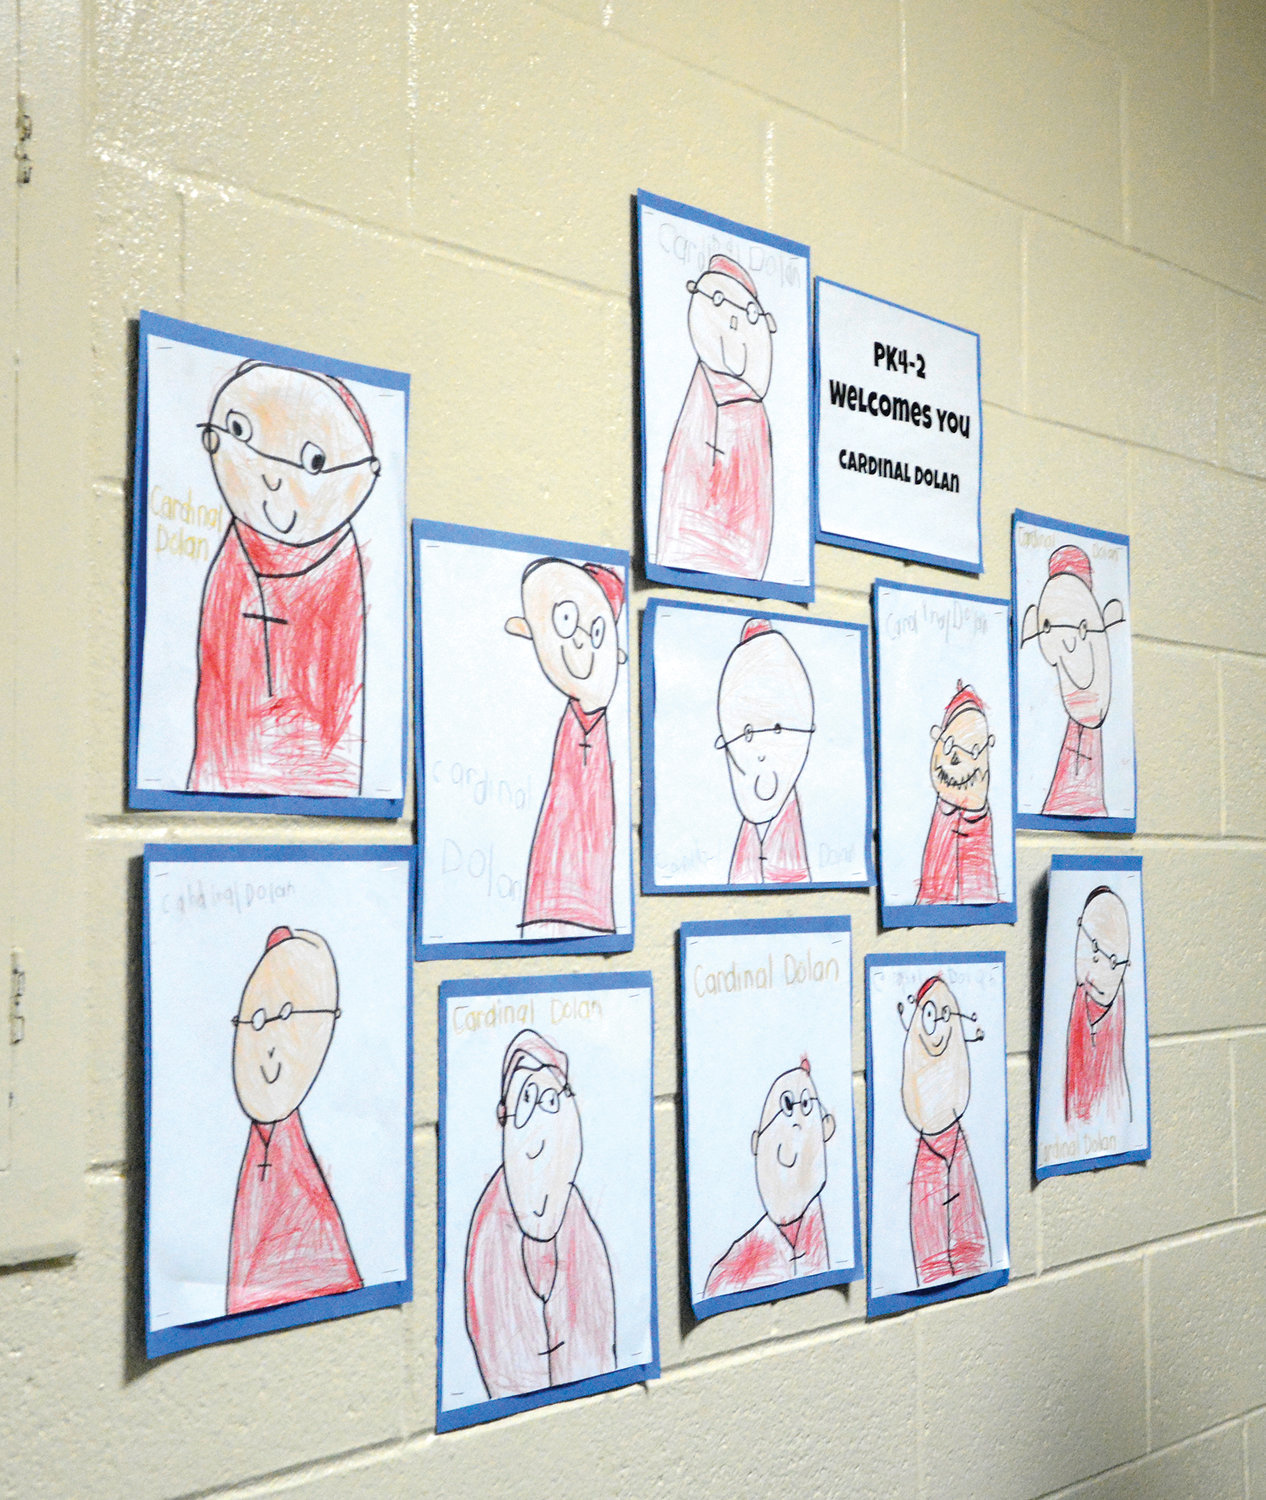 Creative renderings of Cardinal Dolan by artistic youngsters grace a hallway wall at the school.